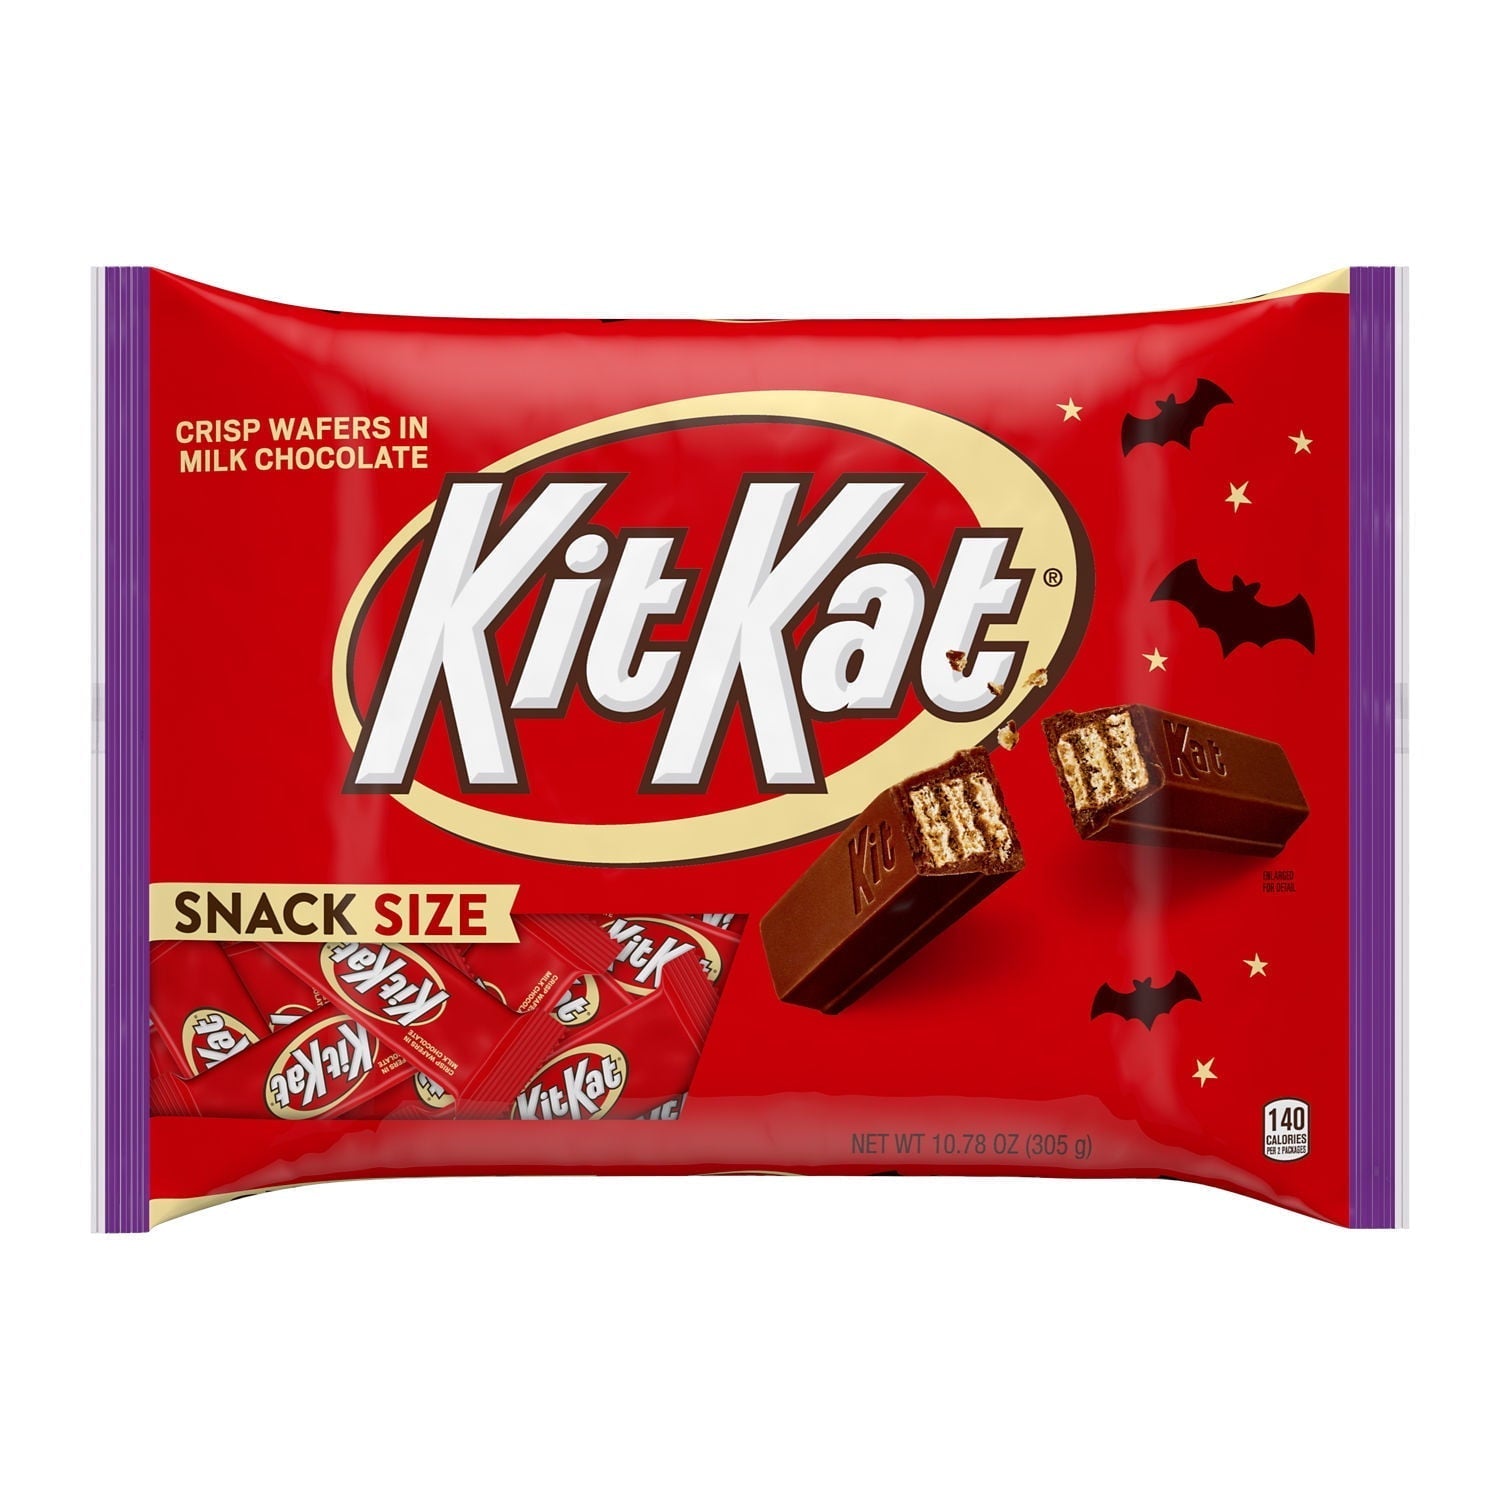 Wholesale prices with free shipping all over United States Kit Kat® Milk Chocolate Snack Size, Halloween Wafer Candy Bars Bag, 10.78 oz - Steven Deals